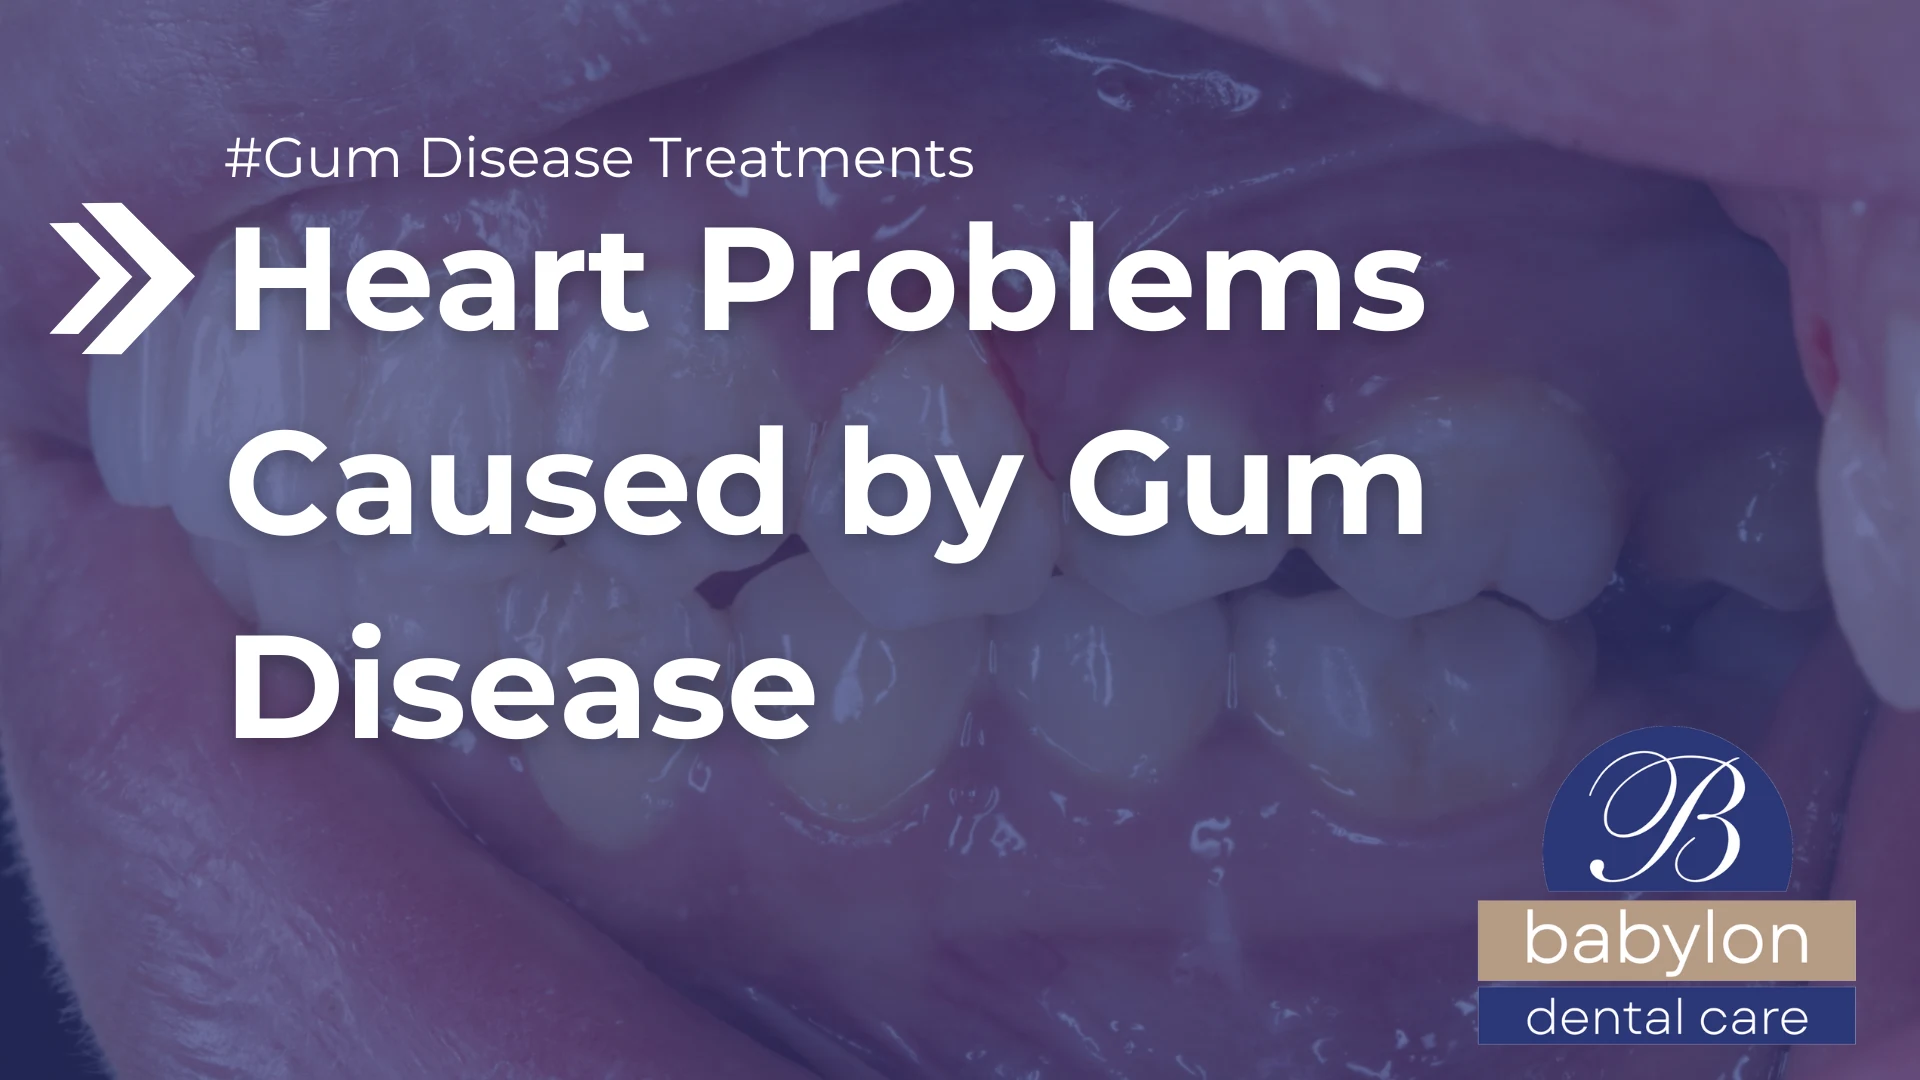 Heart Problems Caused by Gum Disease Image - new logo